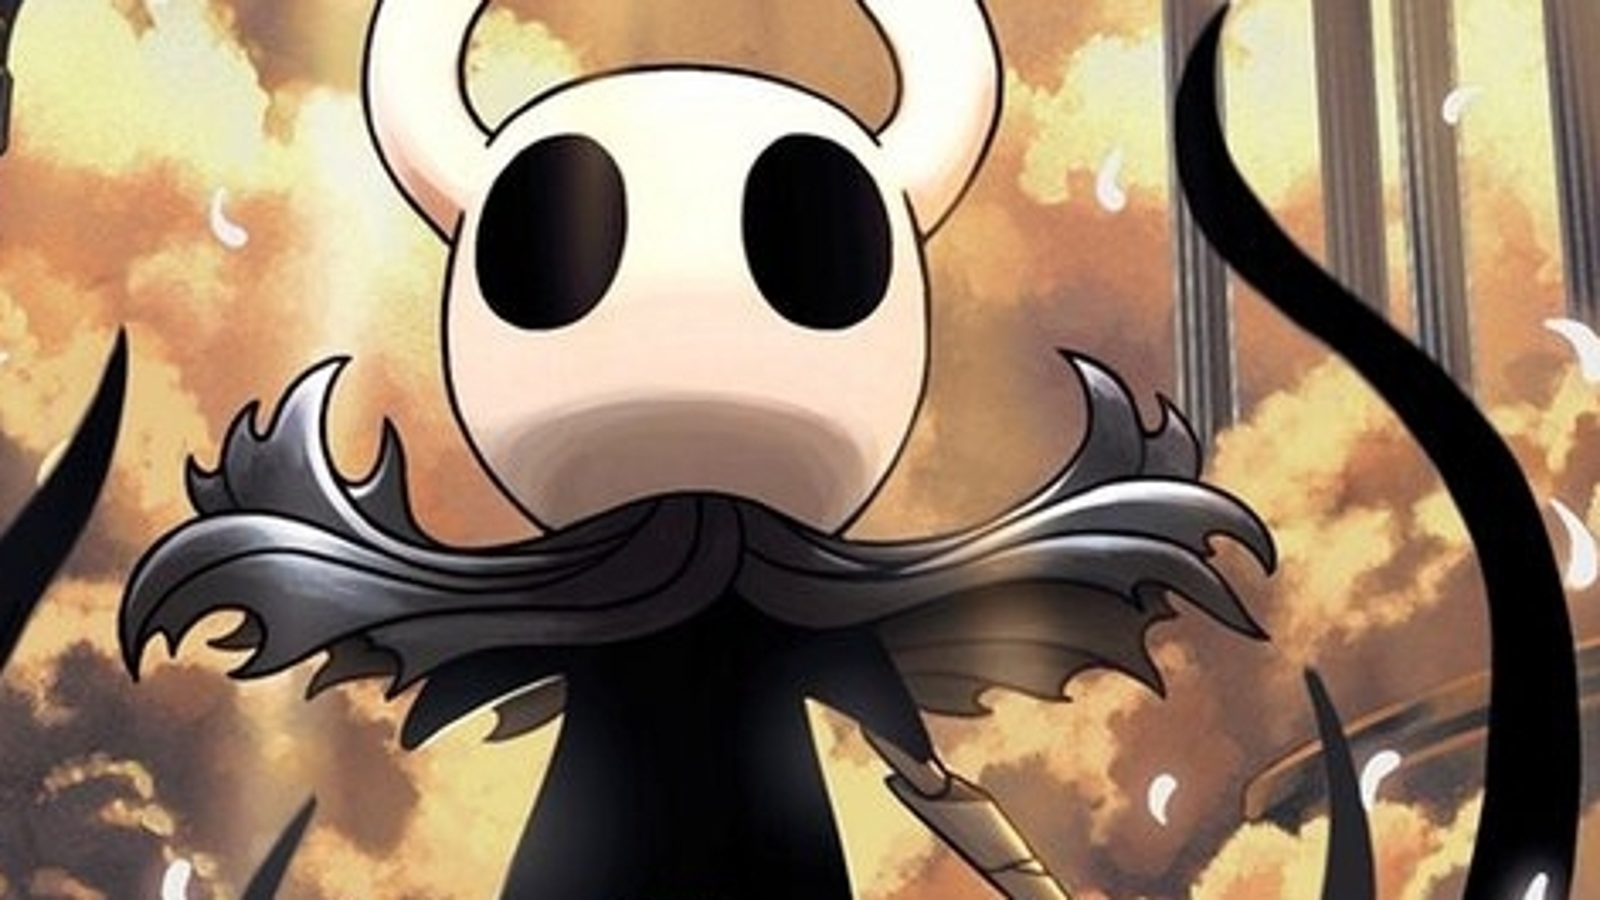 Hollow Knight Nintendo Switch Review - Is It Worth it? 